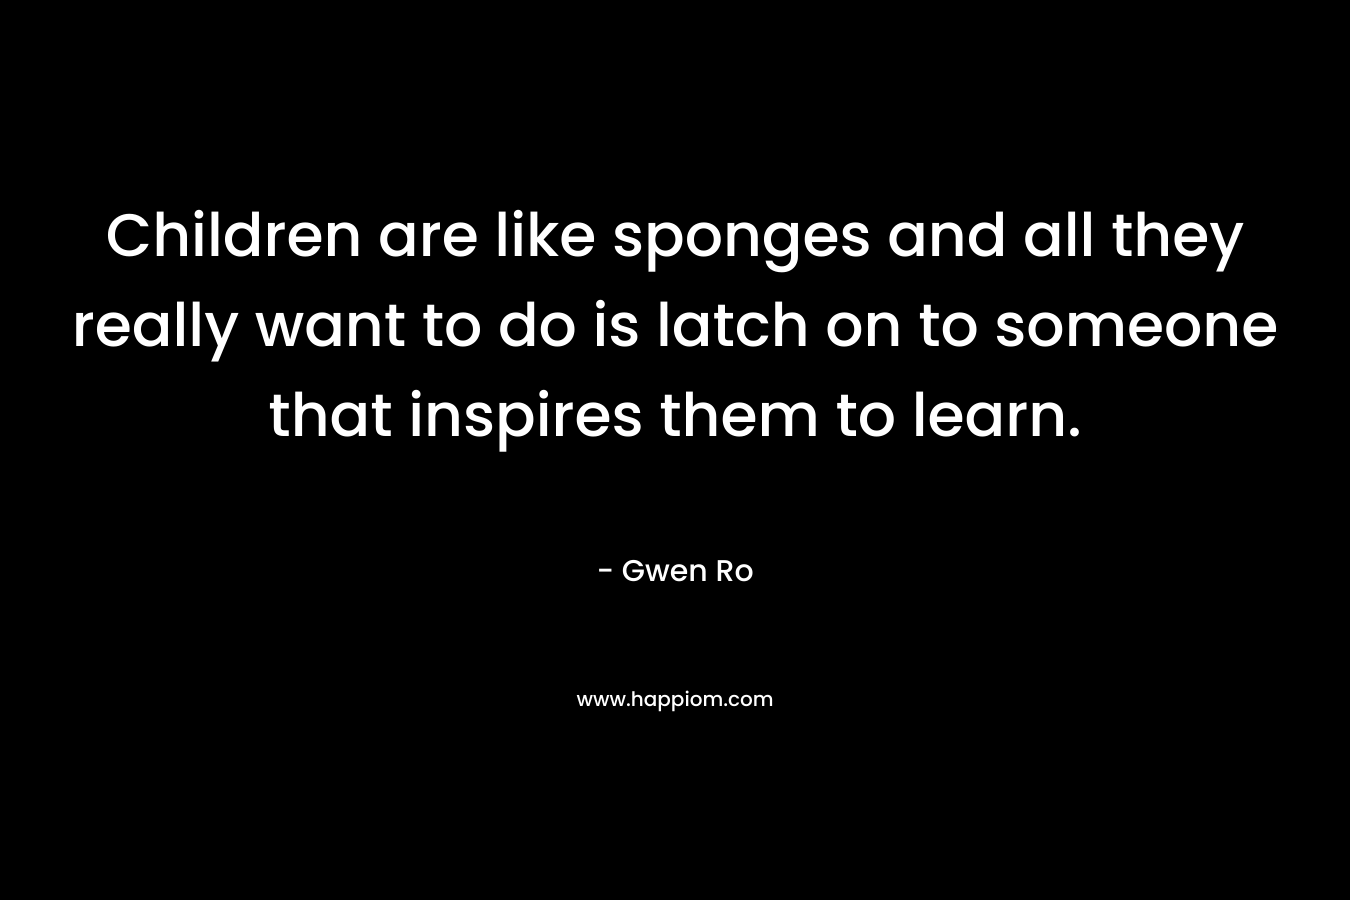 Children are like sponges and all they really want to do is latch on to someone that inspires them to learn. – Gwen Ro